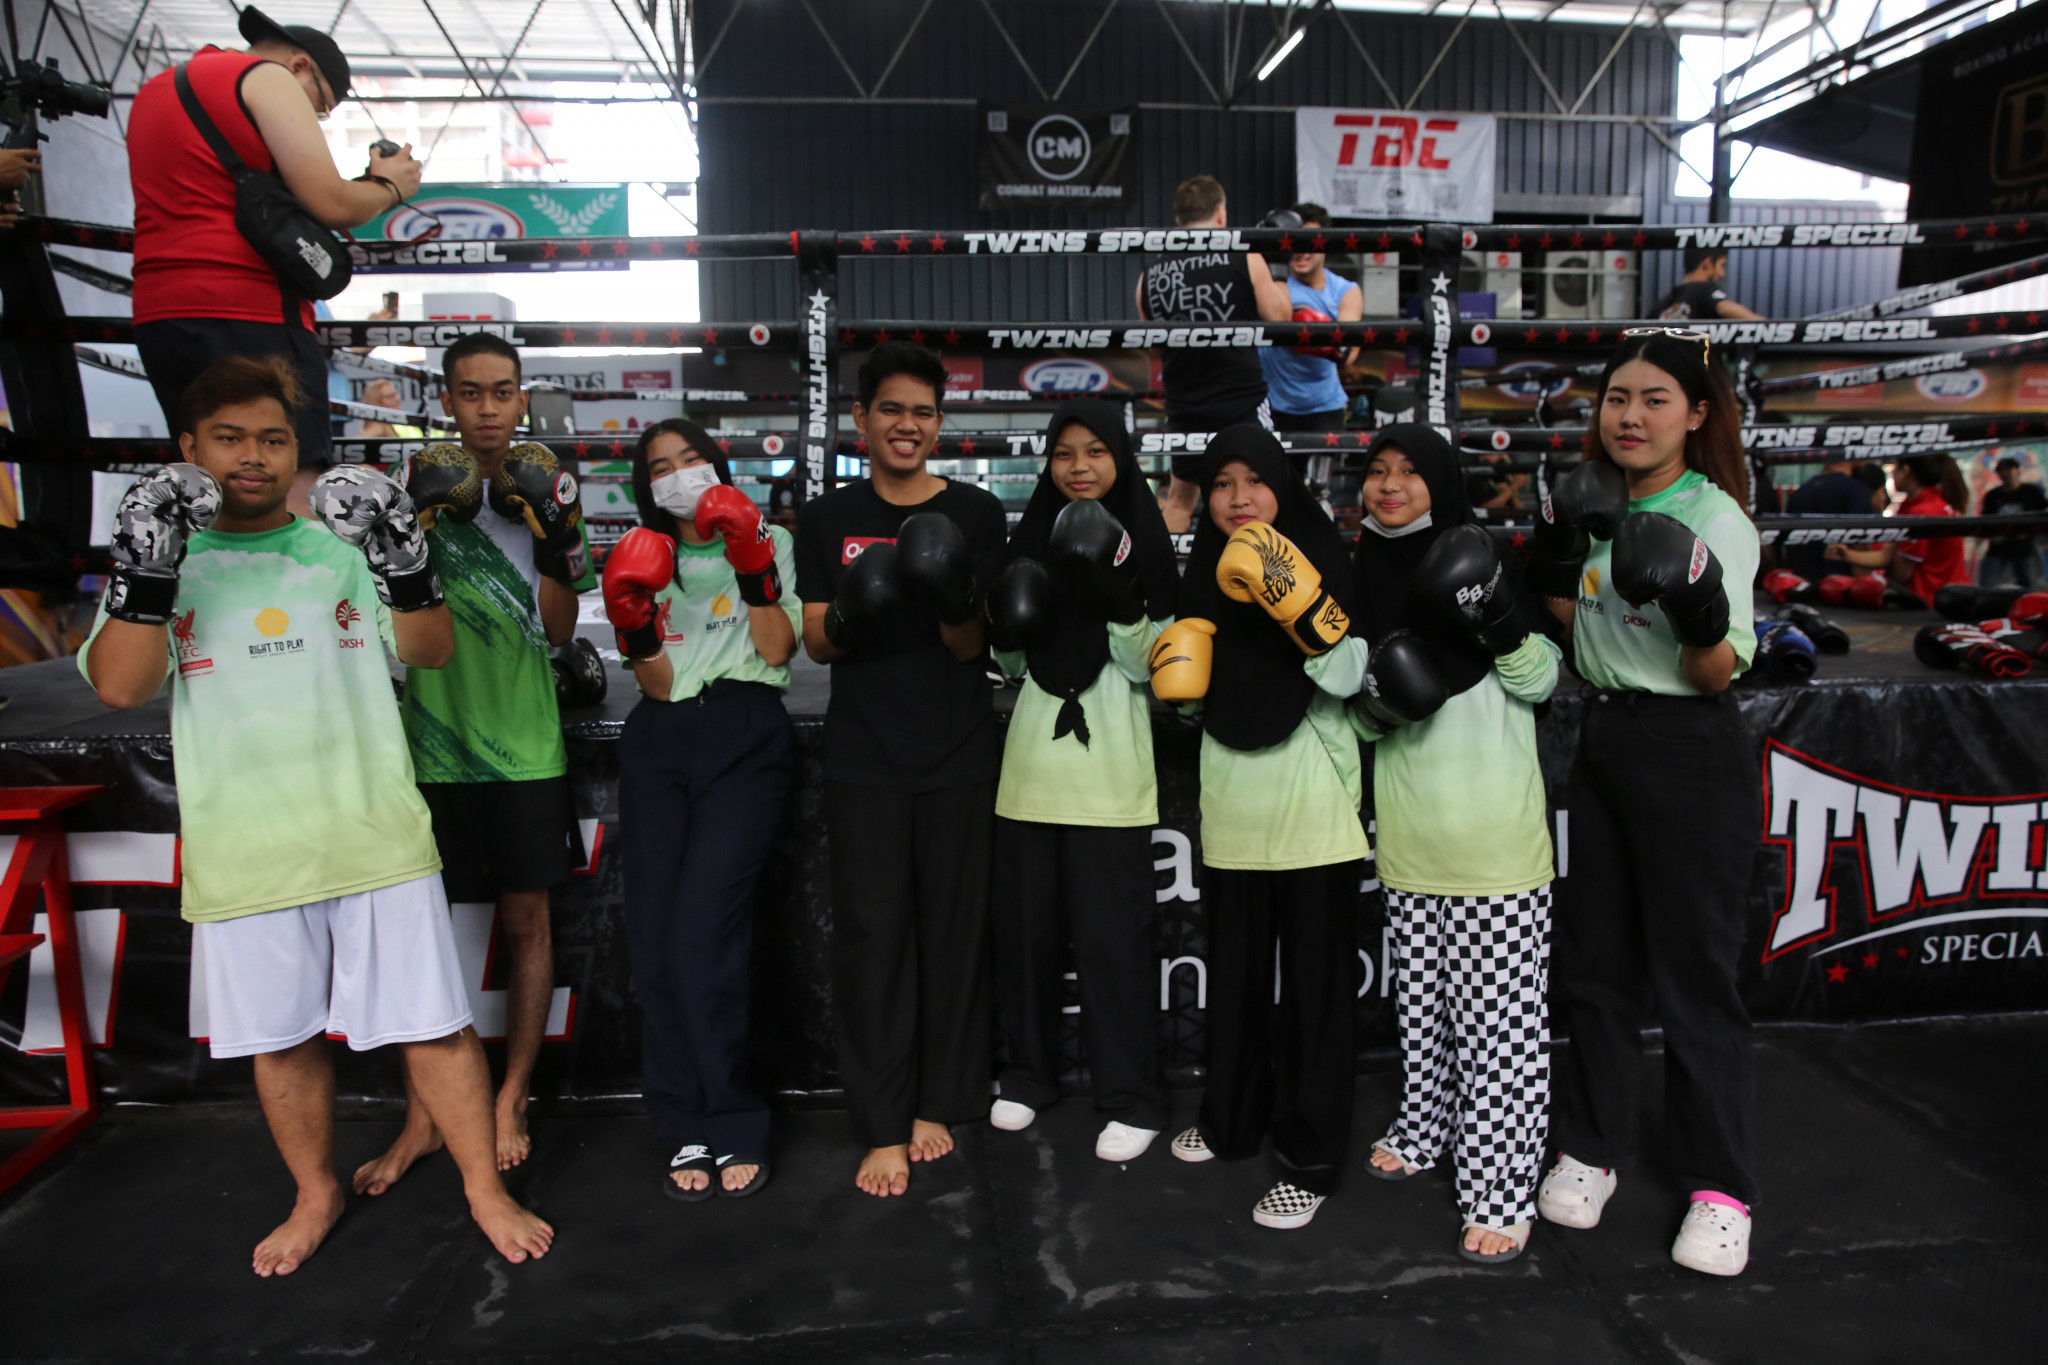 Boxing was among the many sports that participants tried ©UTS